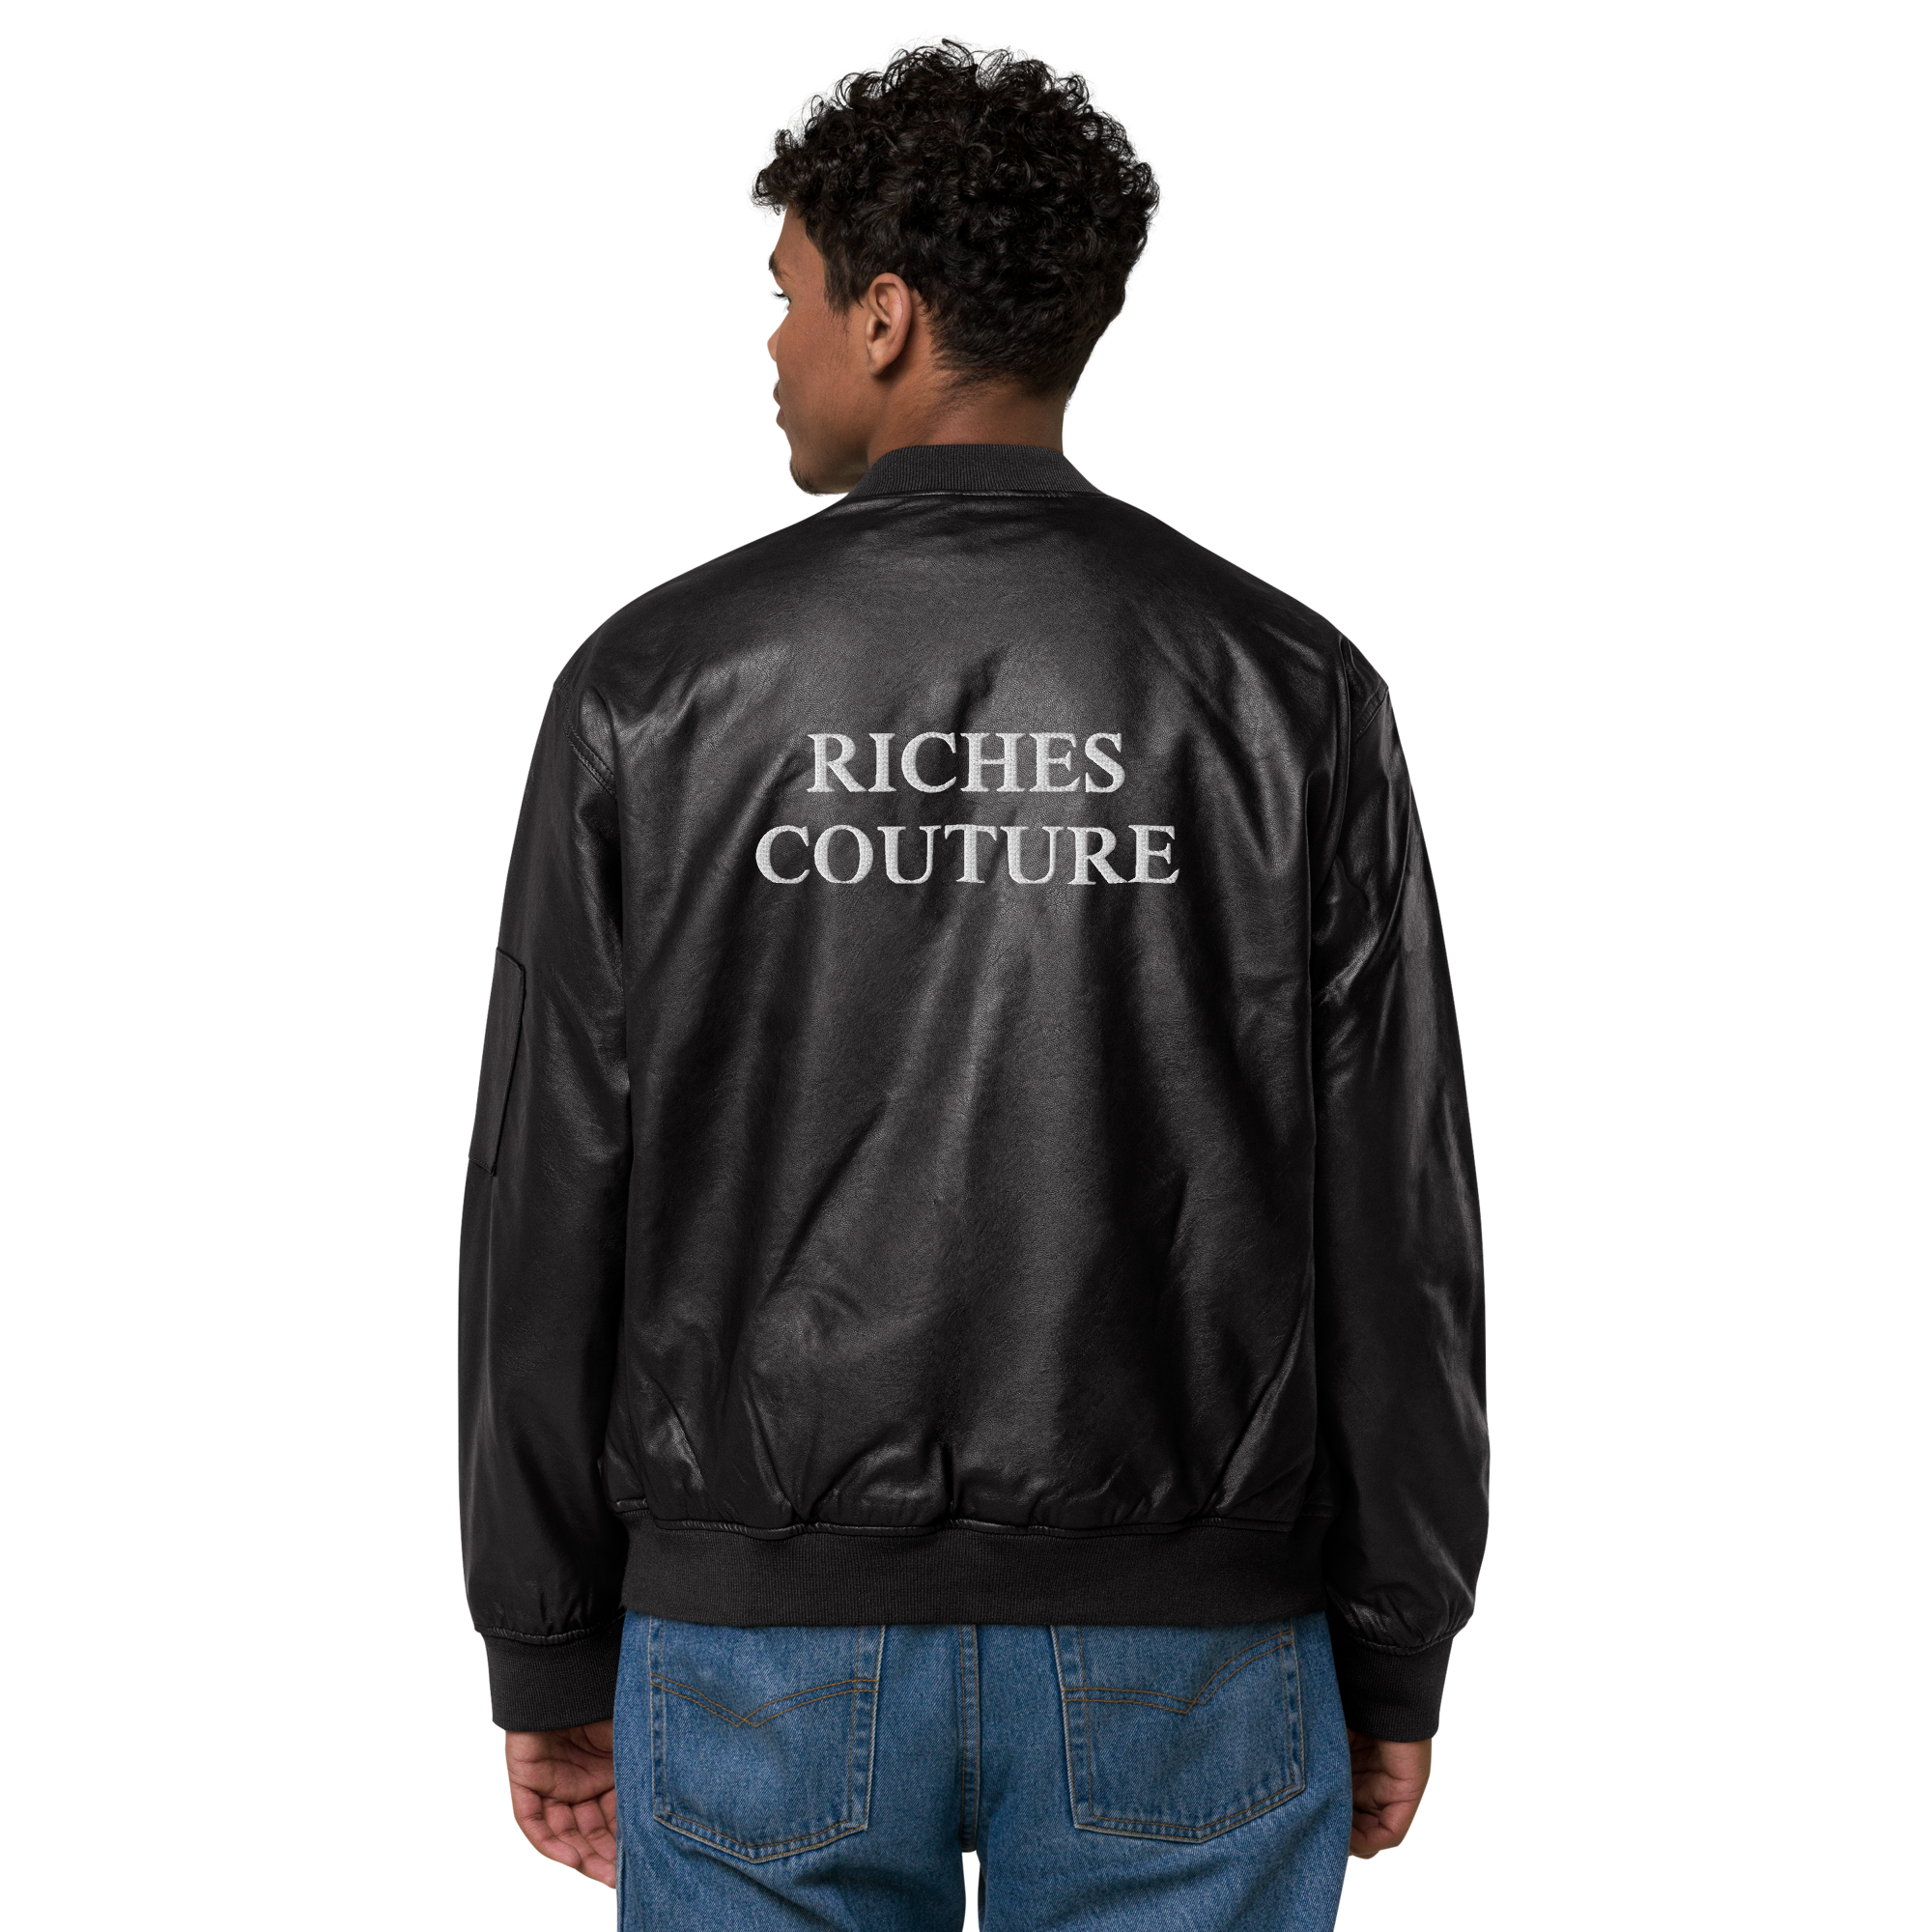 Riches Couture Black Leather Bomber Jacket